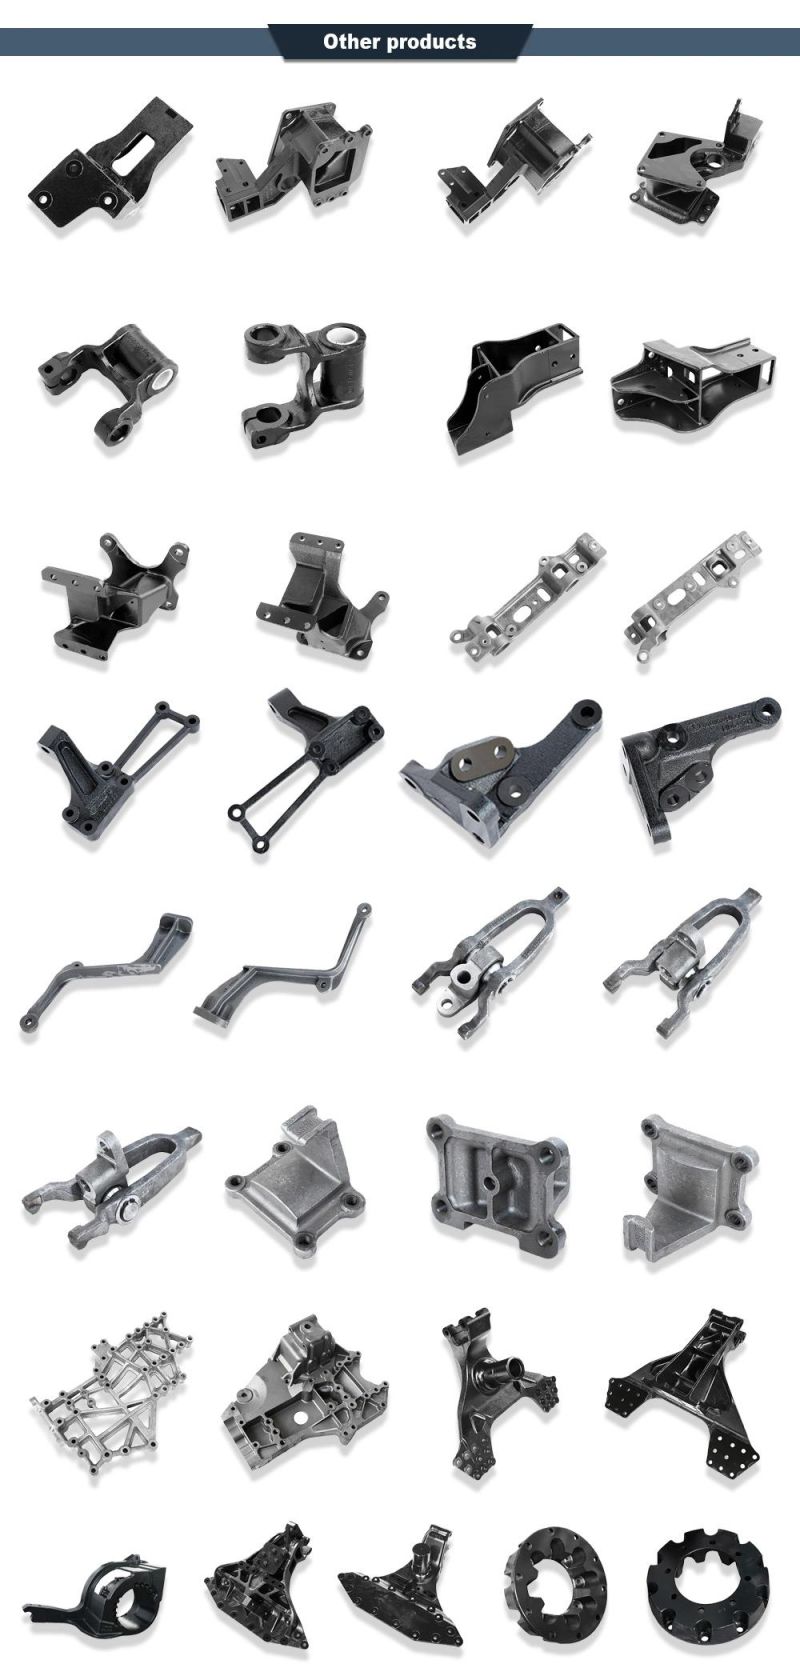 Cast Ductile Iron Universal Guy Attachments for Attaching to Fiberglass Guy Strains or Clevis Fittings